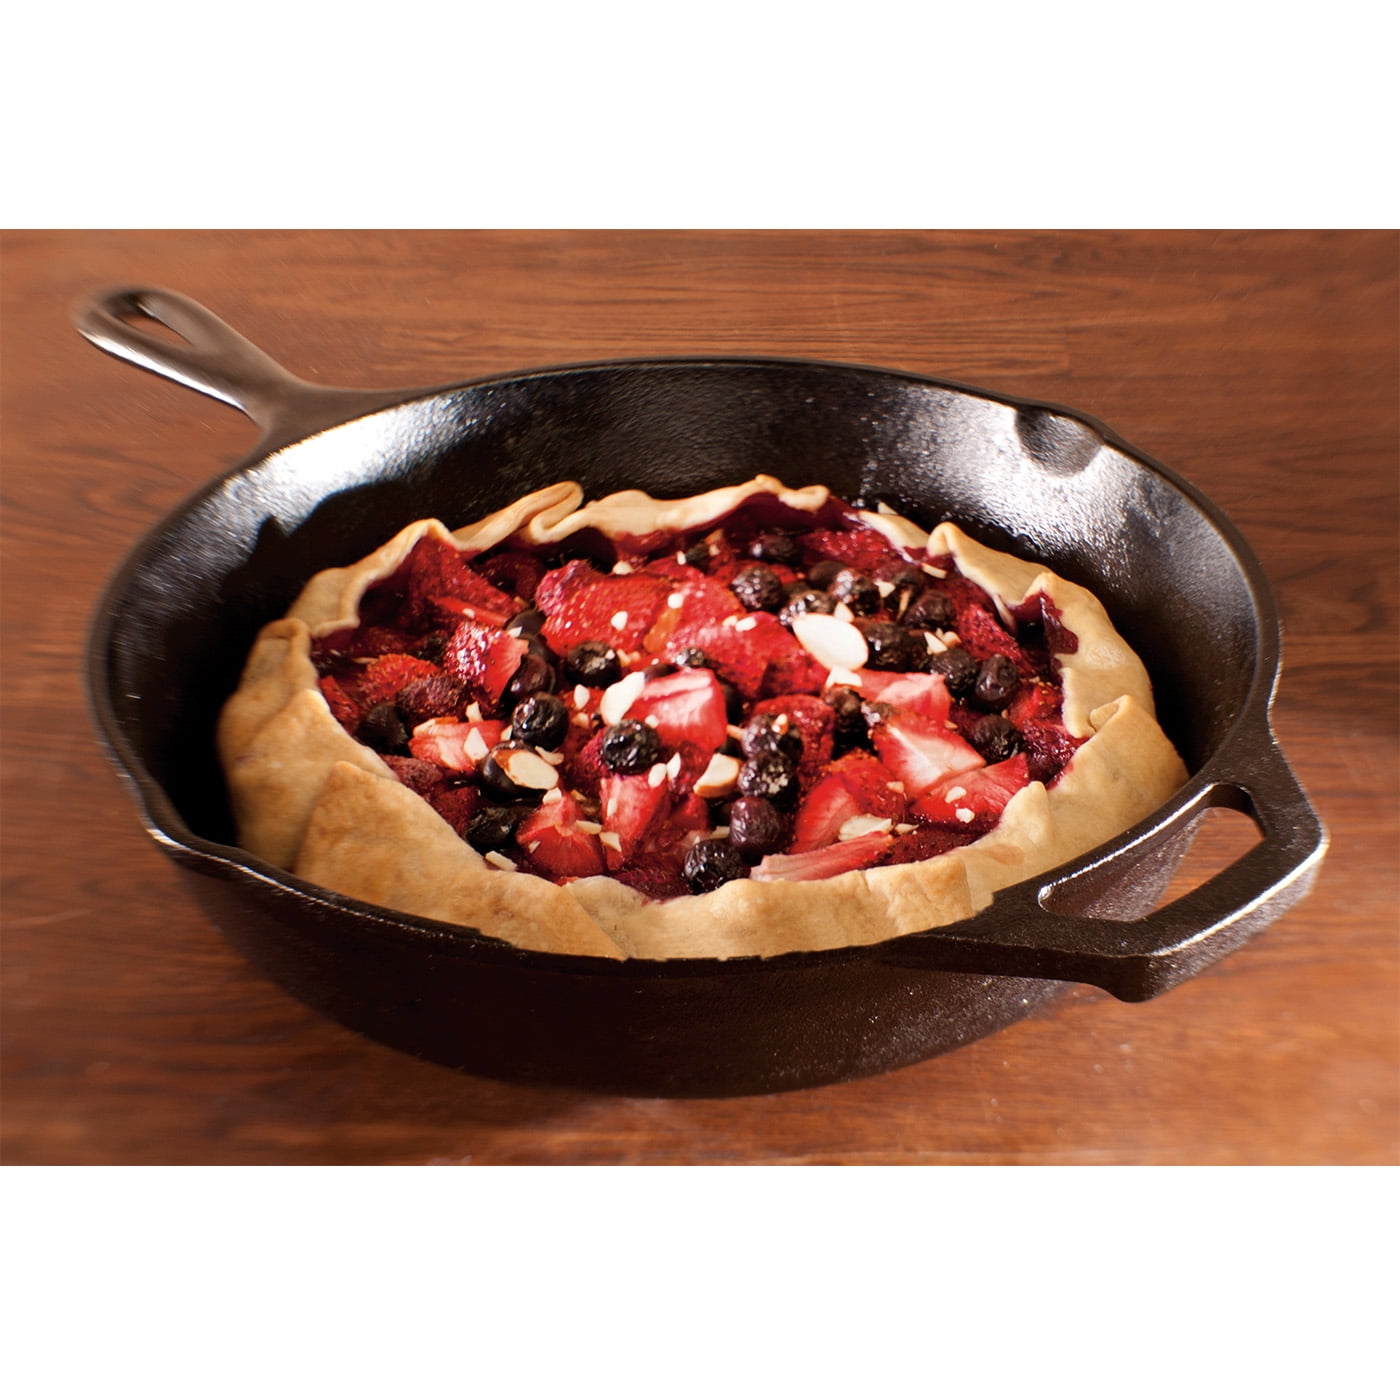 Pie Pan - 9” Cast Iron Skillet for Baking Apple, Pumpkin, Cherry Pies -  with Silicone Trivet - by KUHA